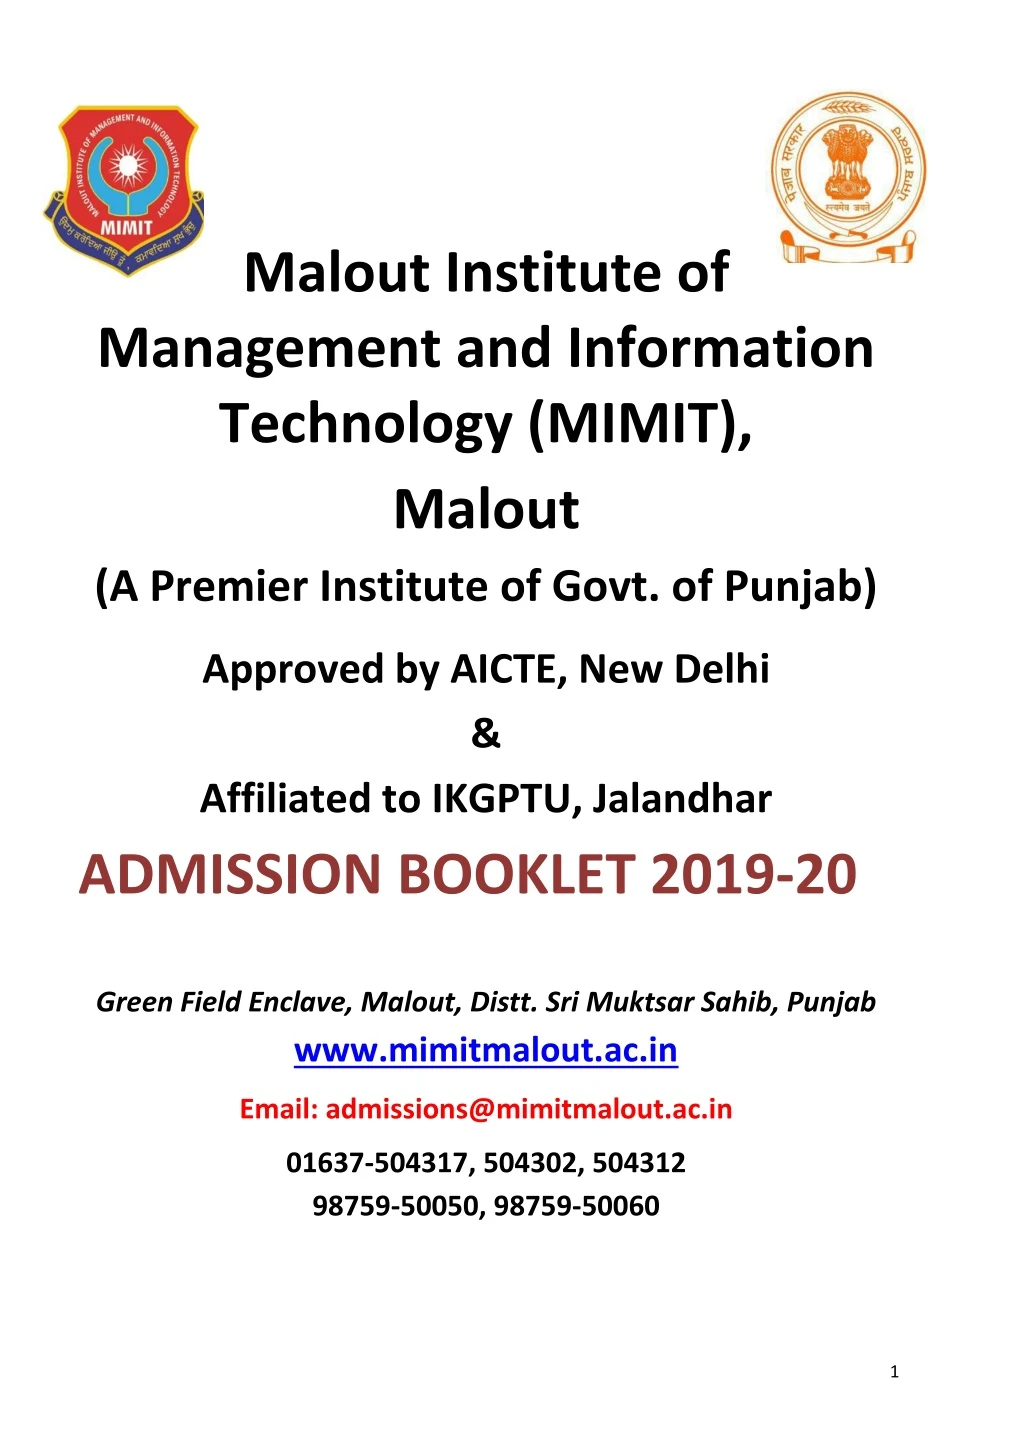 malout institute of management and information